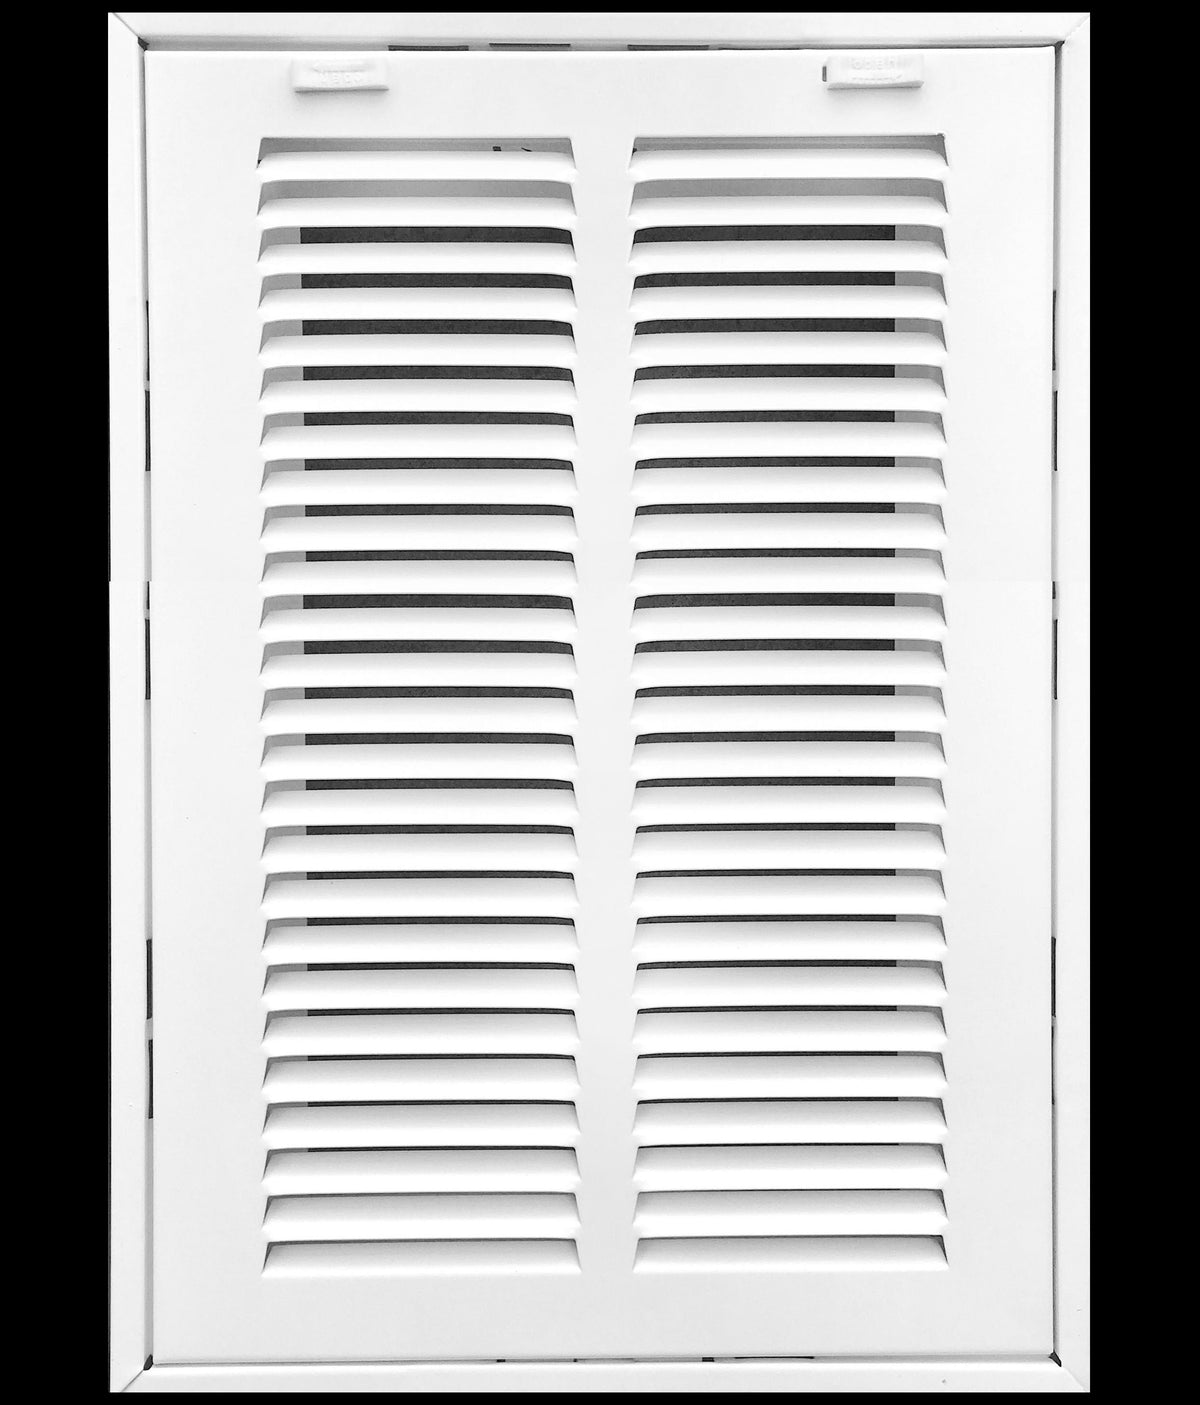 8&quot; X 20&quot; Steel Return Air Filter Grille for 1&quot; Filter - Removable Frame - [Outer Dimensions: 10 5/8&quot; X 22 5/8&quot;]